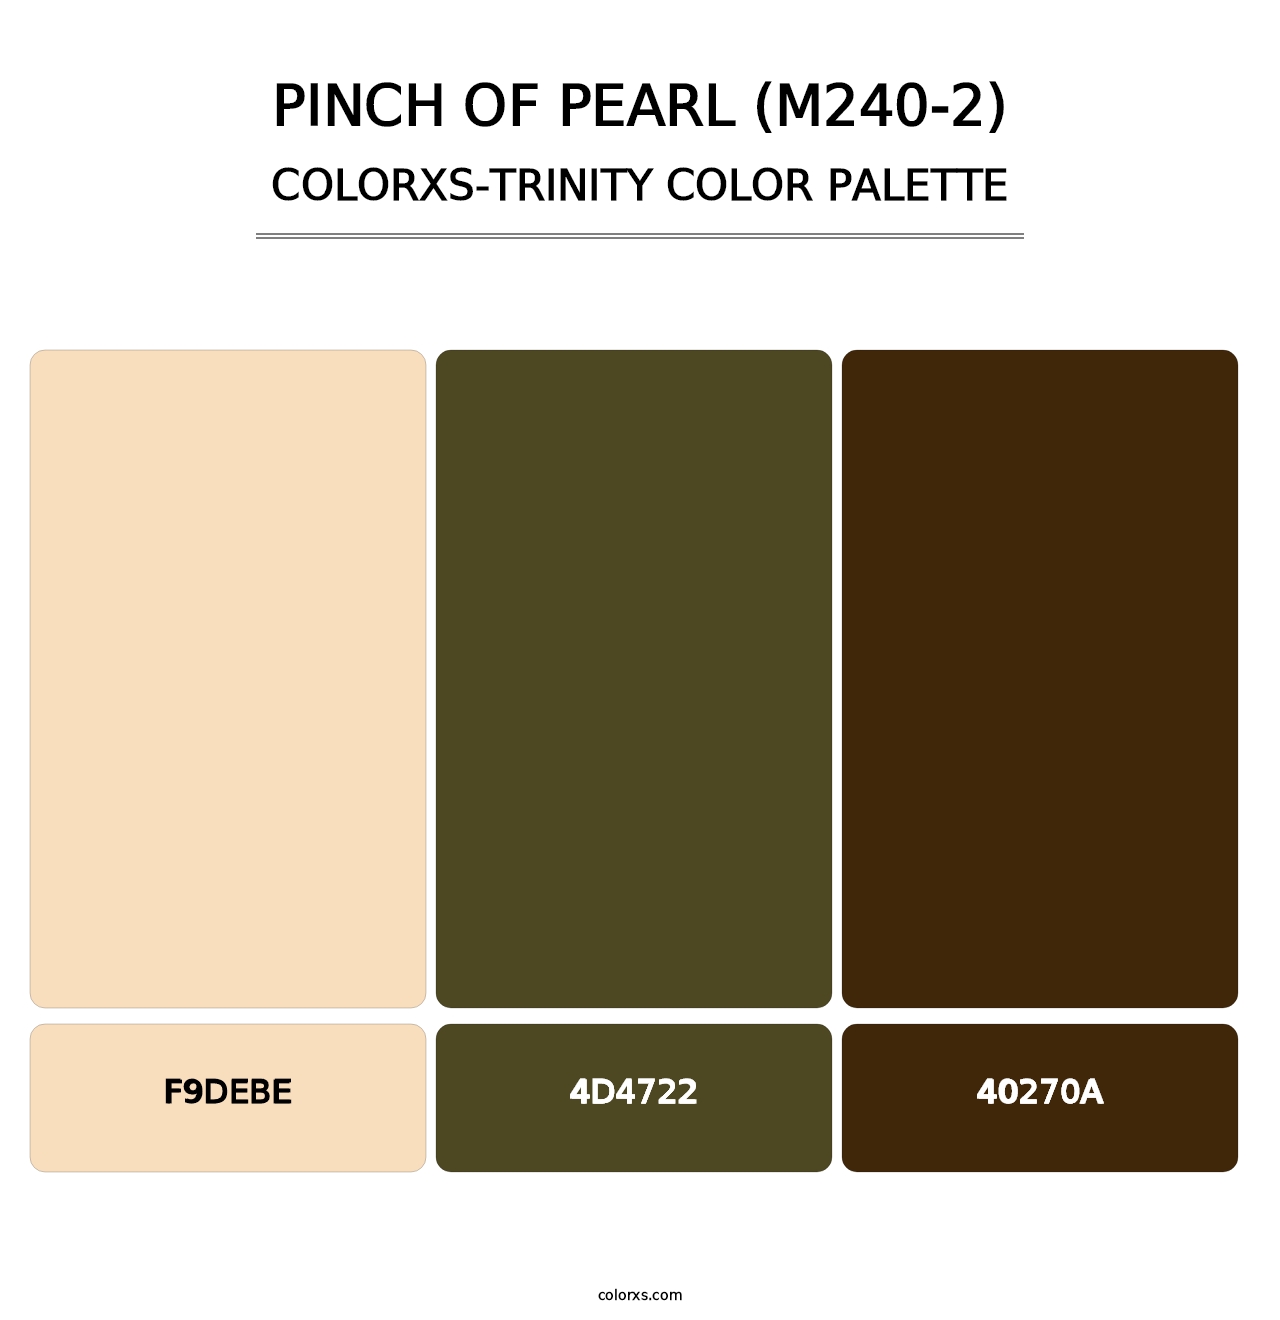 Pinch Of Pearl (M240-2) - Colorxs Trinity Palette